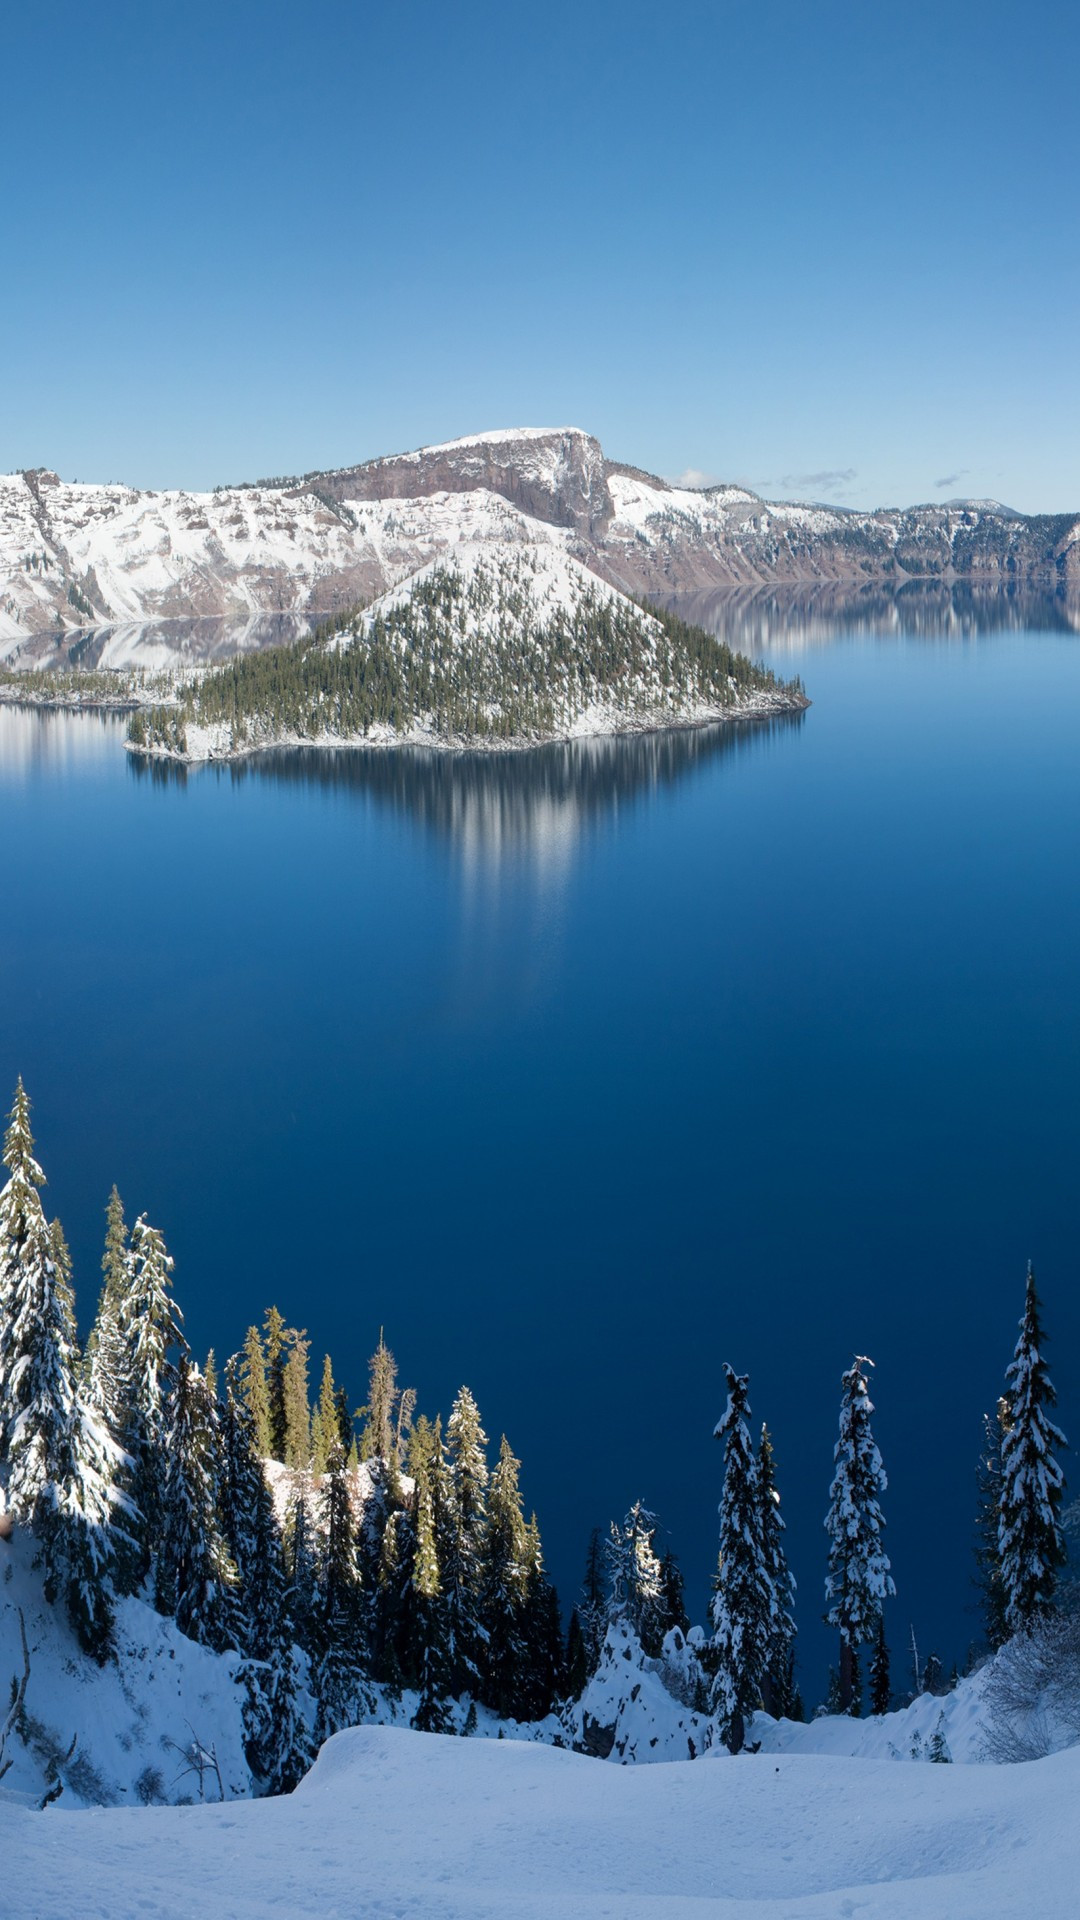 Download 1080x1920 Oregon Crater Lake, Snow, Winter, Trees Wallpaper for iPhone iPhone 7 Plus, iPhone 6+, Sony Xperia Z, HTC One